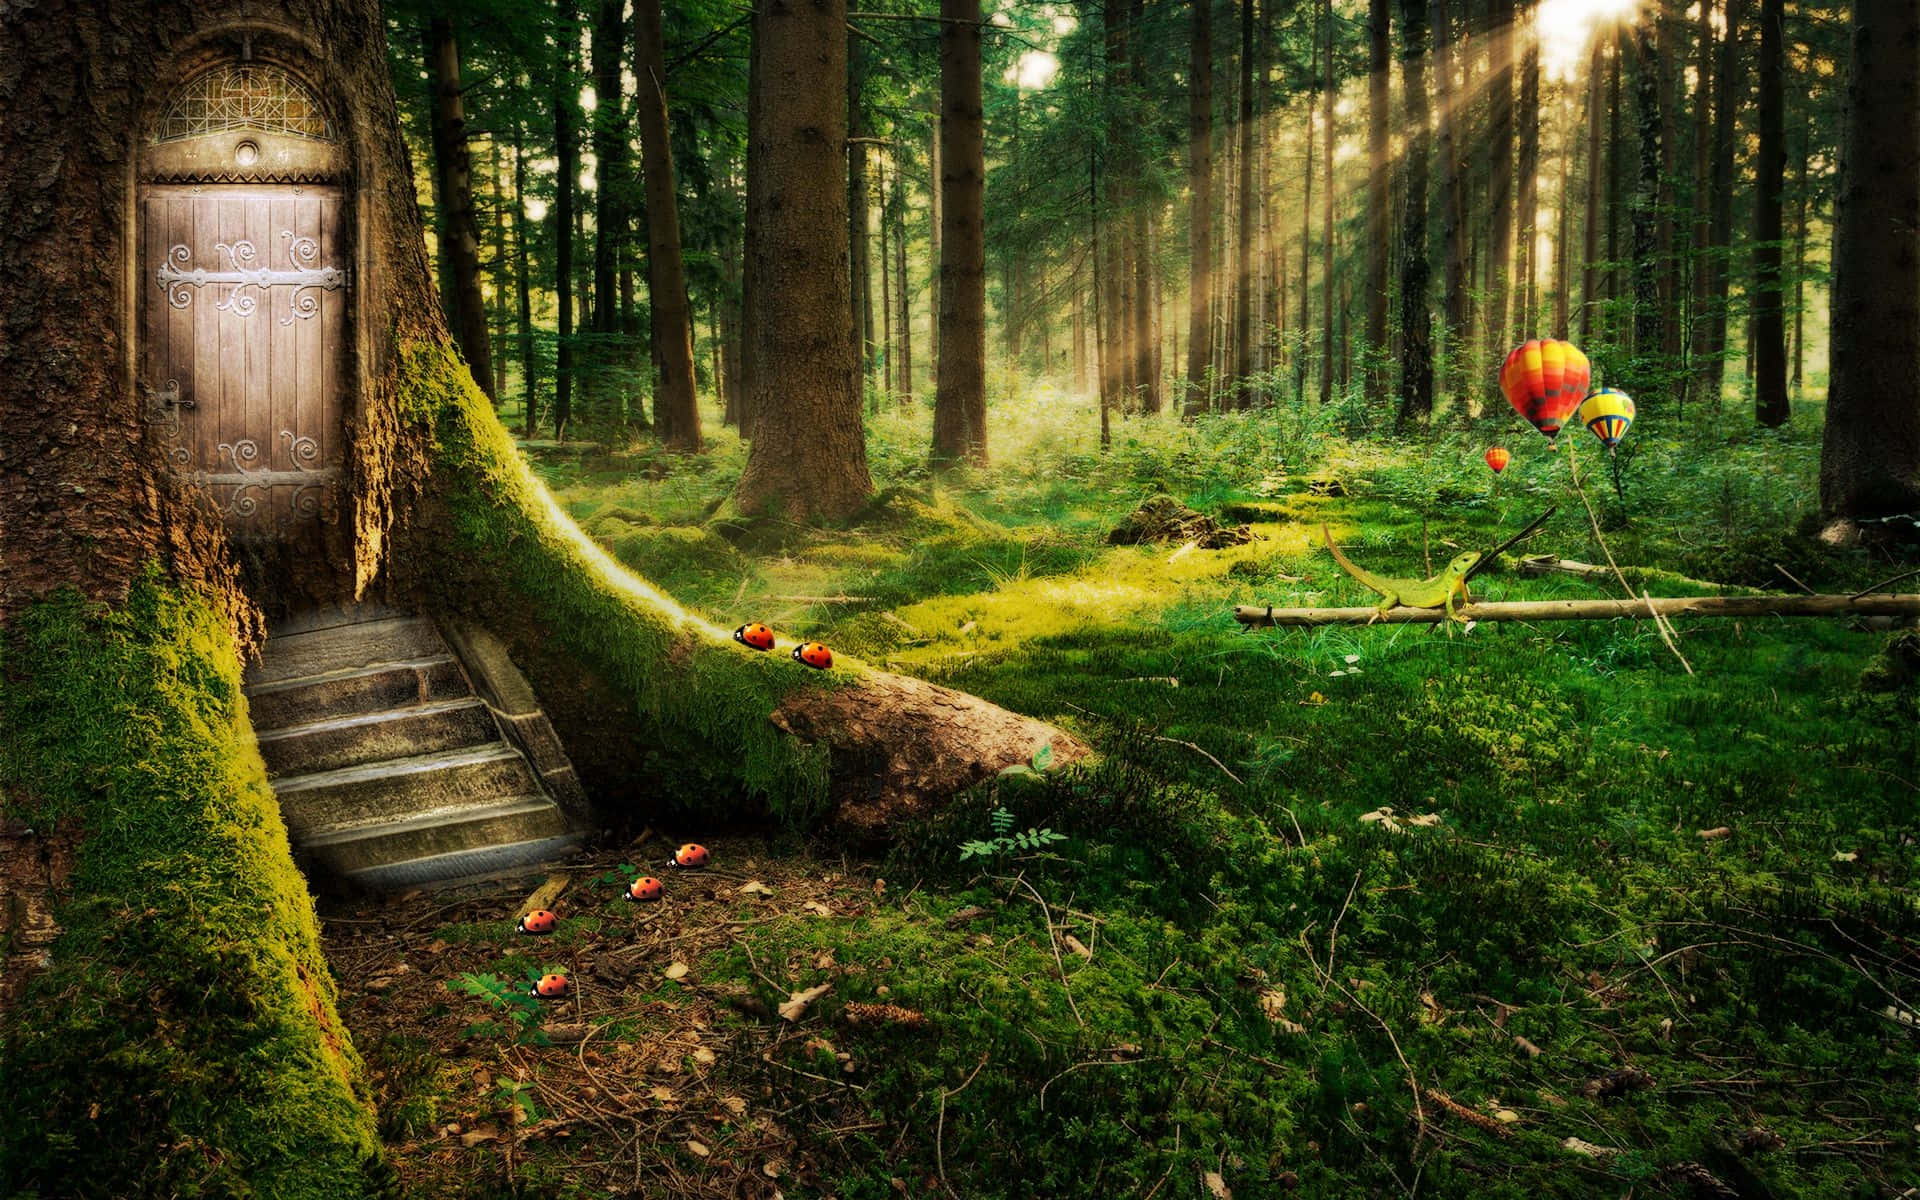 An enchanted Fairy Forest, deep in a magical forest. Wallpaper